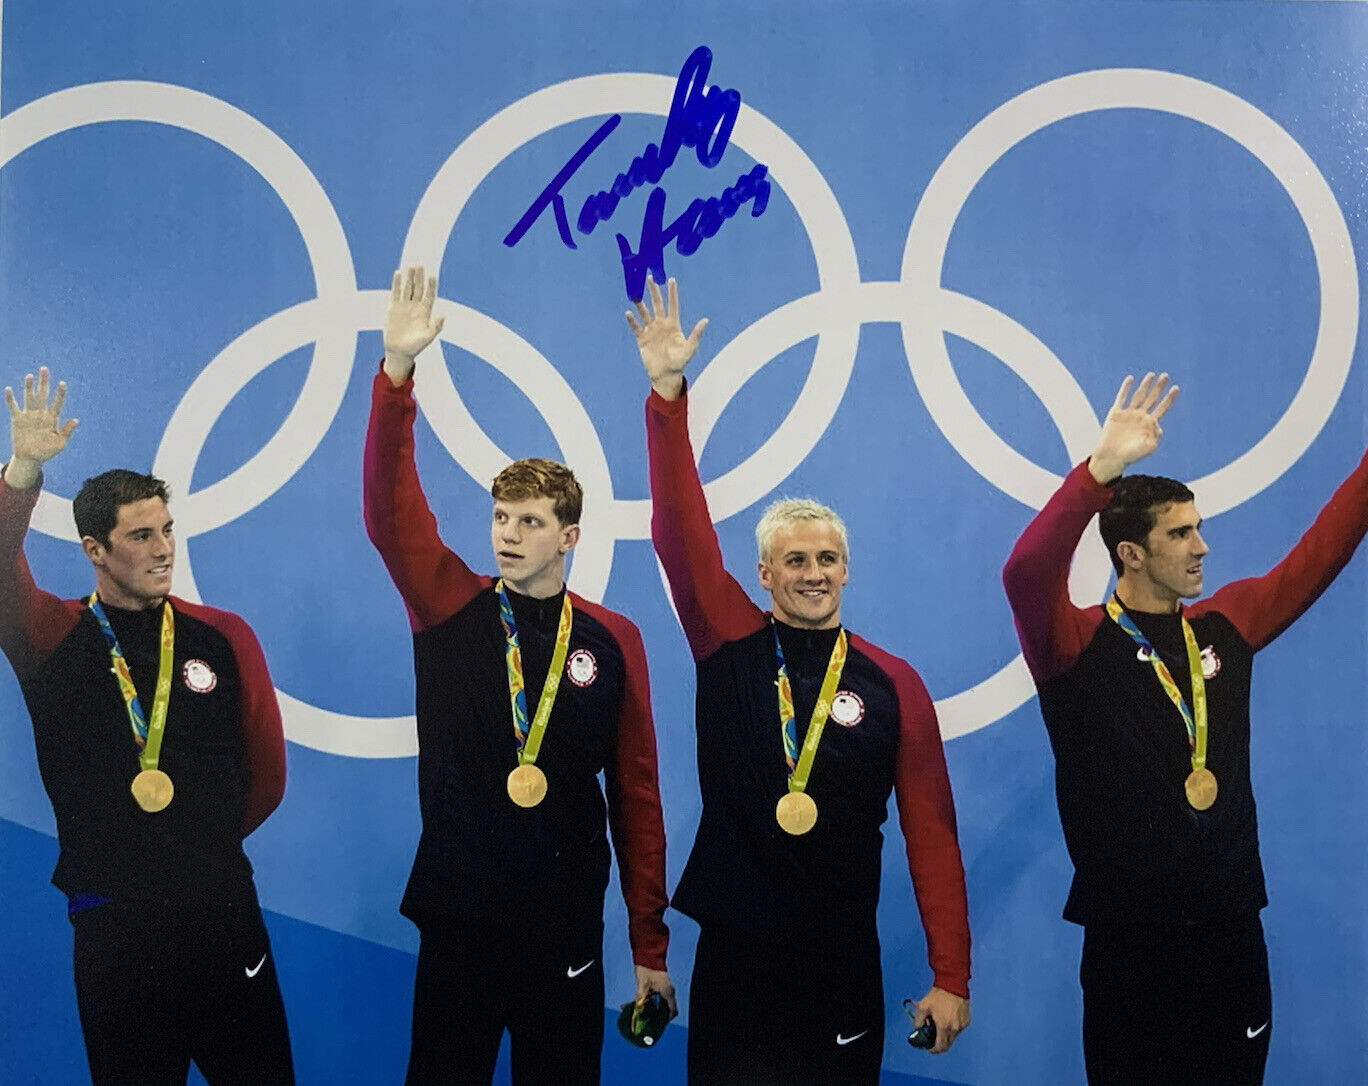 TOWNLEY HAAS HAND SIGNED 8x10 Photo Poster painting USA OLYMPICS SWIMMER AUTOGRAPH COA